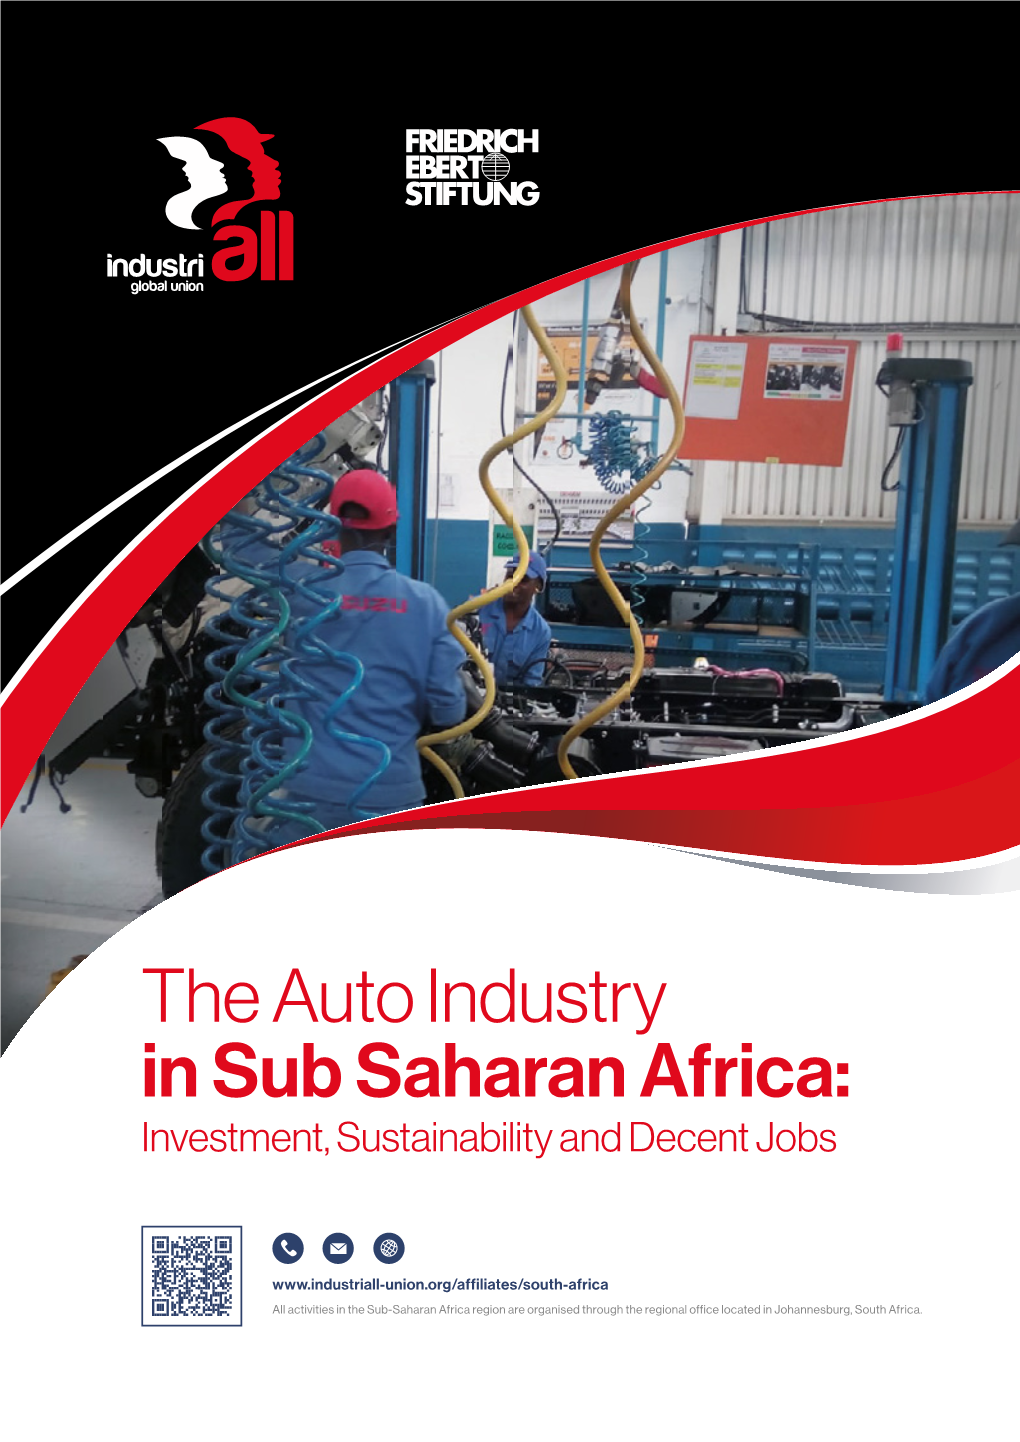 The Auto Industry in Sub Saharan Africa: Investment, Sustainability and Decent Jobs